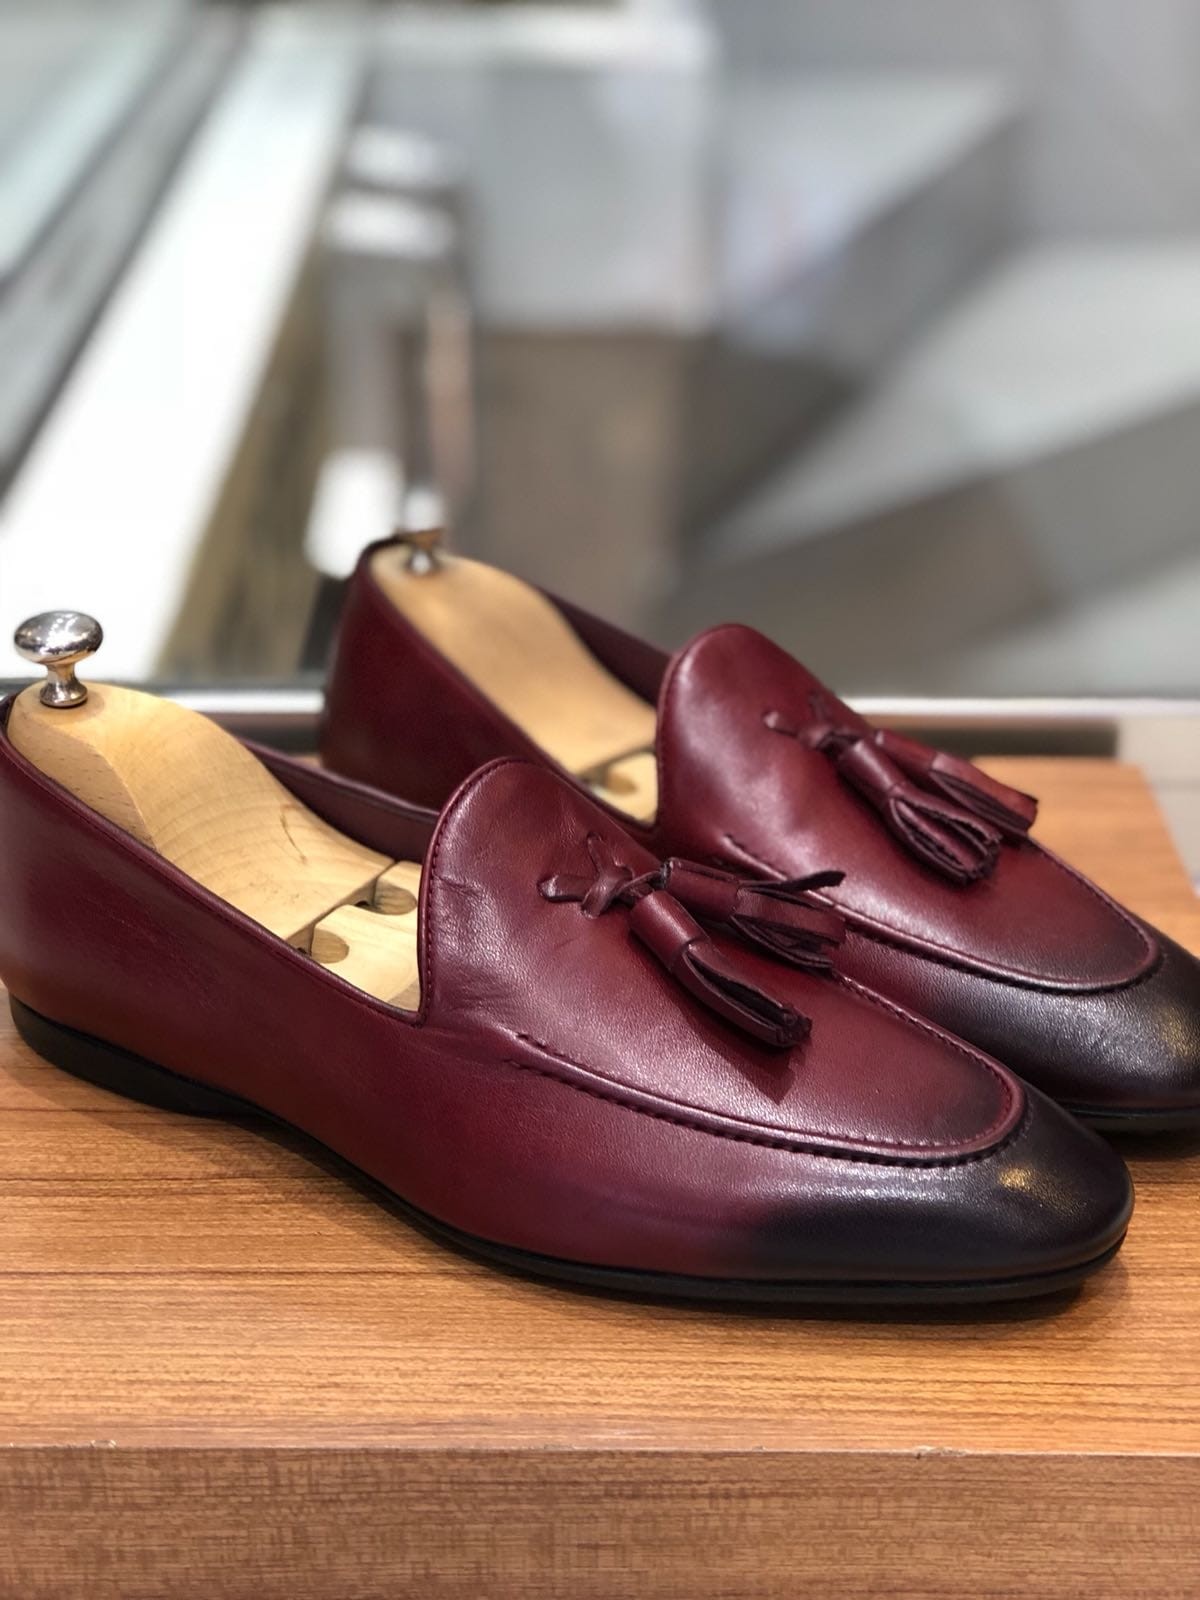 Buy Burgundy Tassel Loafer by Gentwith.com with Free Shipping